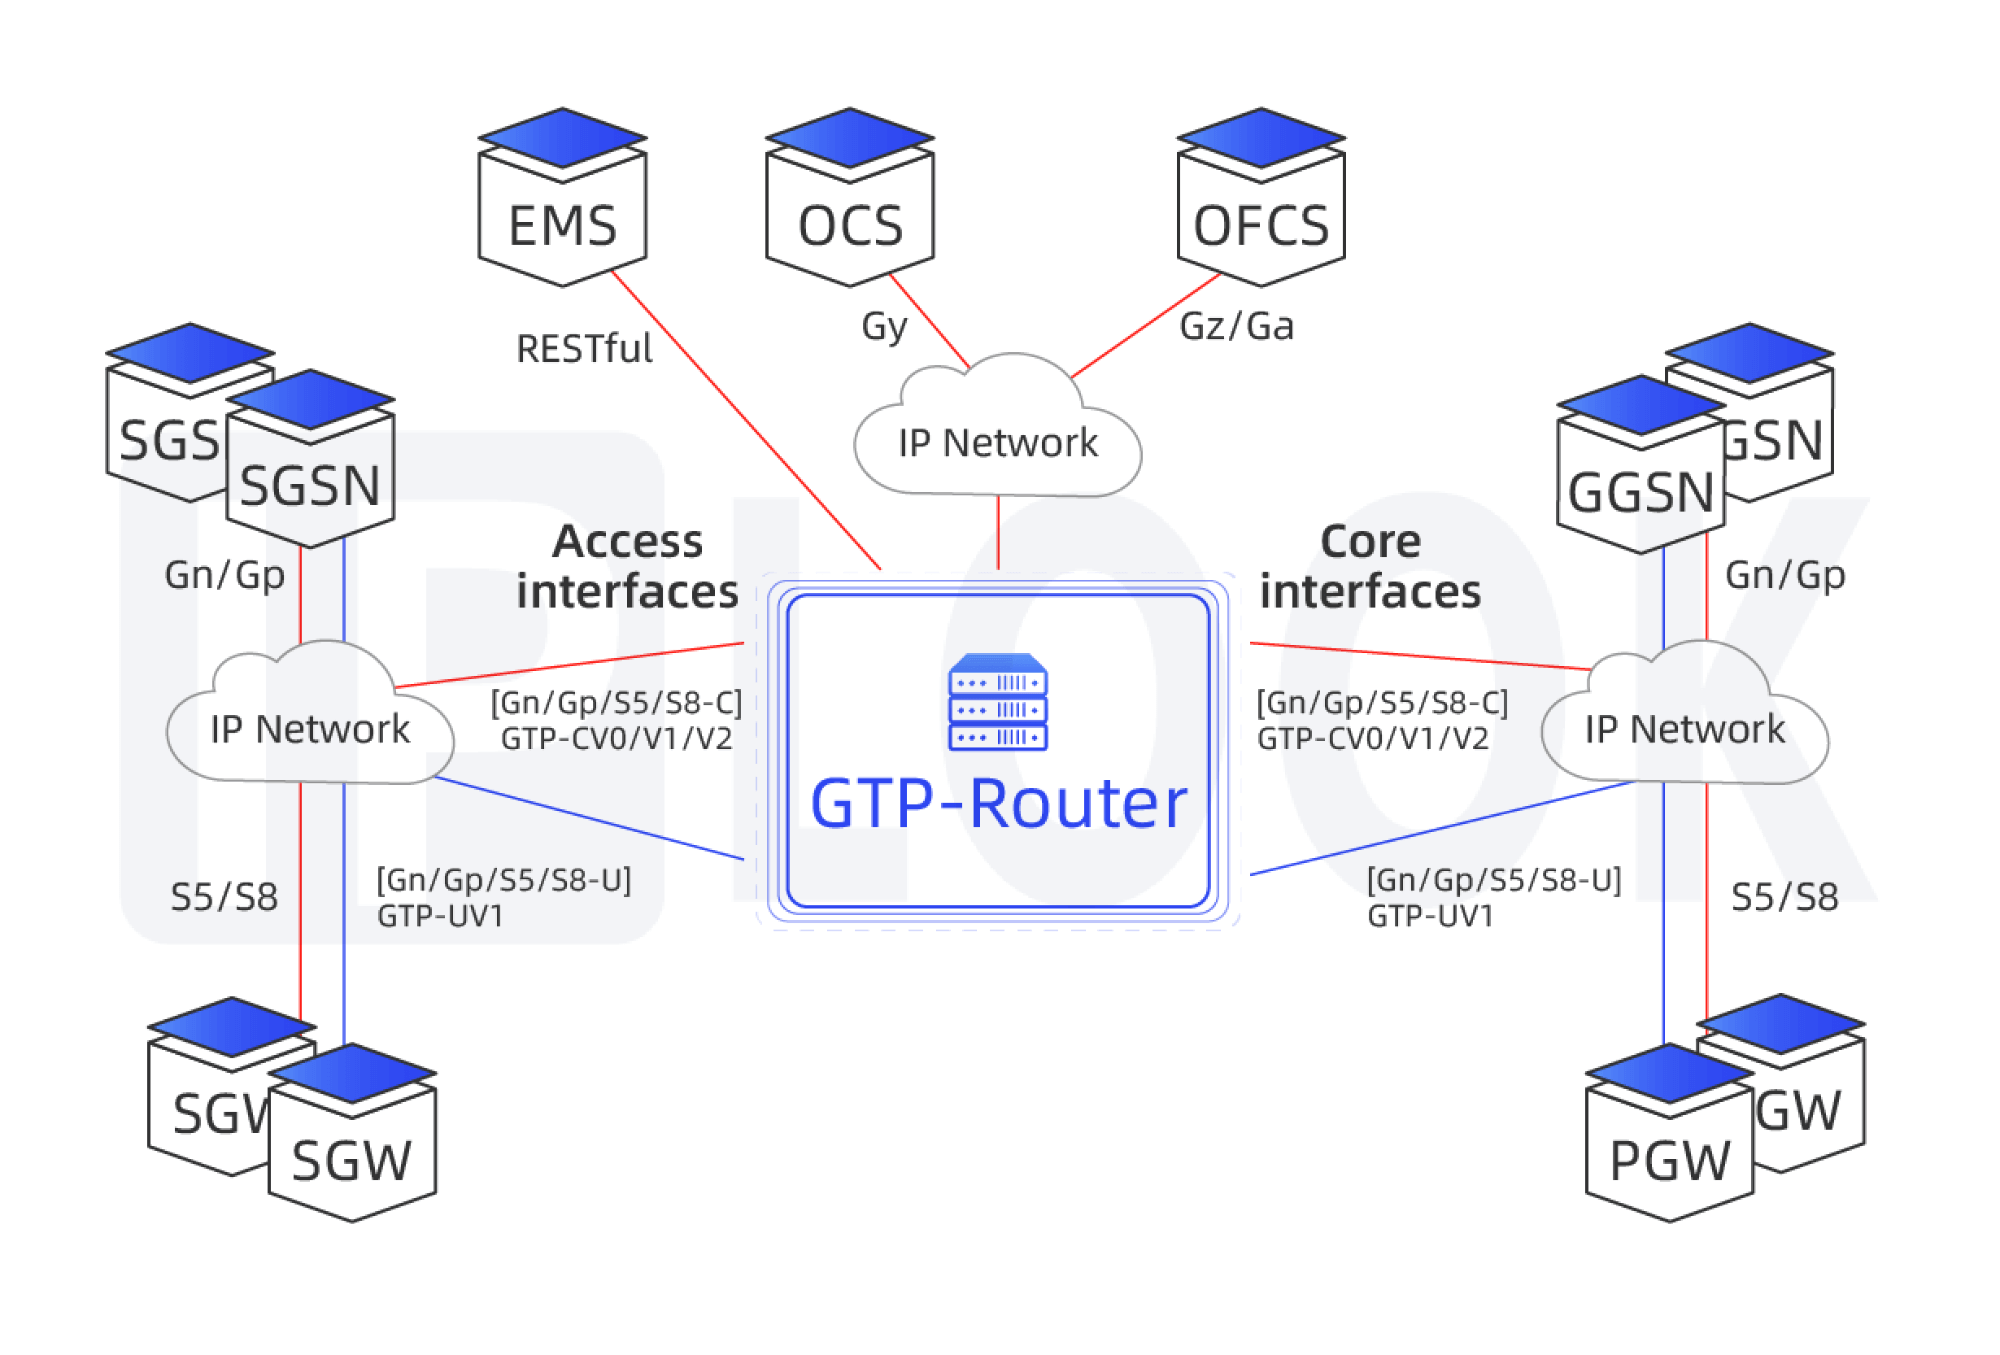 GPRS Tunneling Protocol Router(GTP-Router)